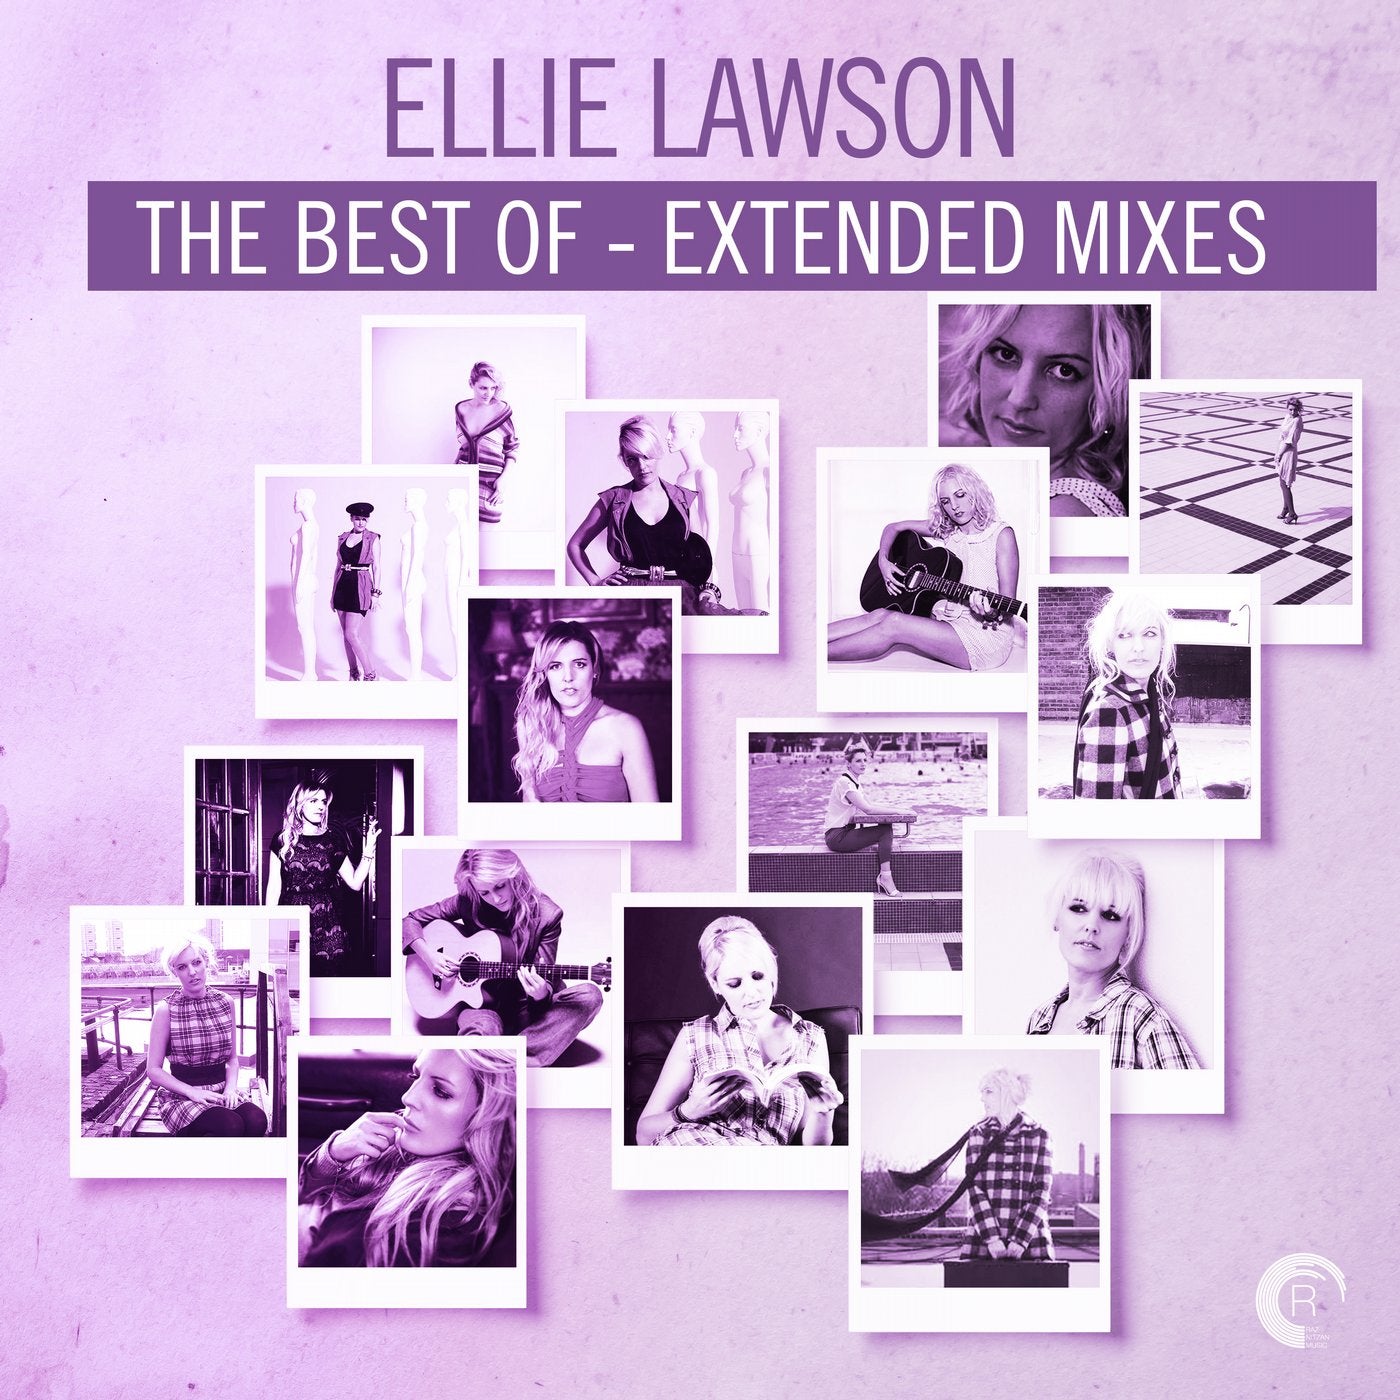 The Best Of - Extended Mixes